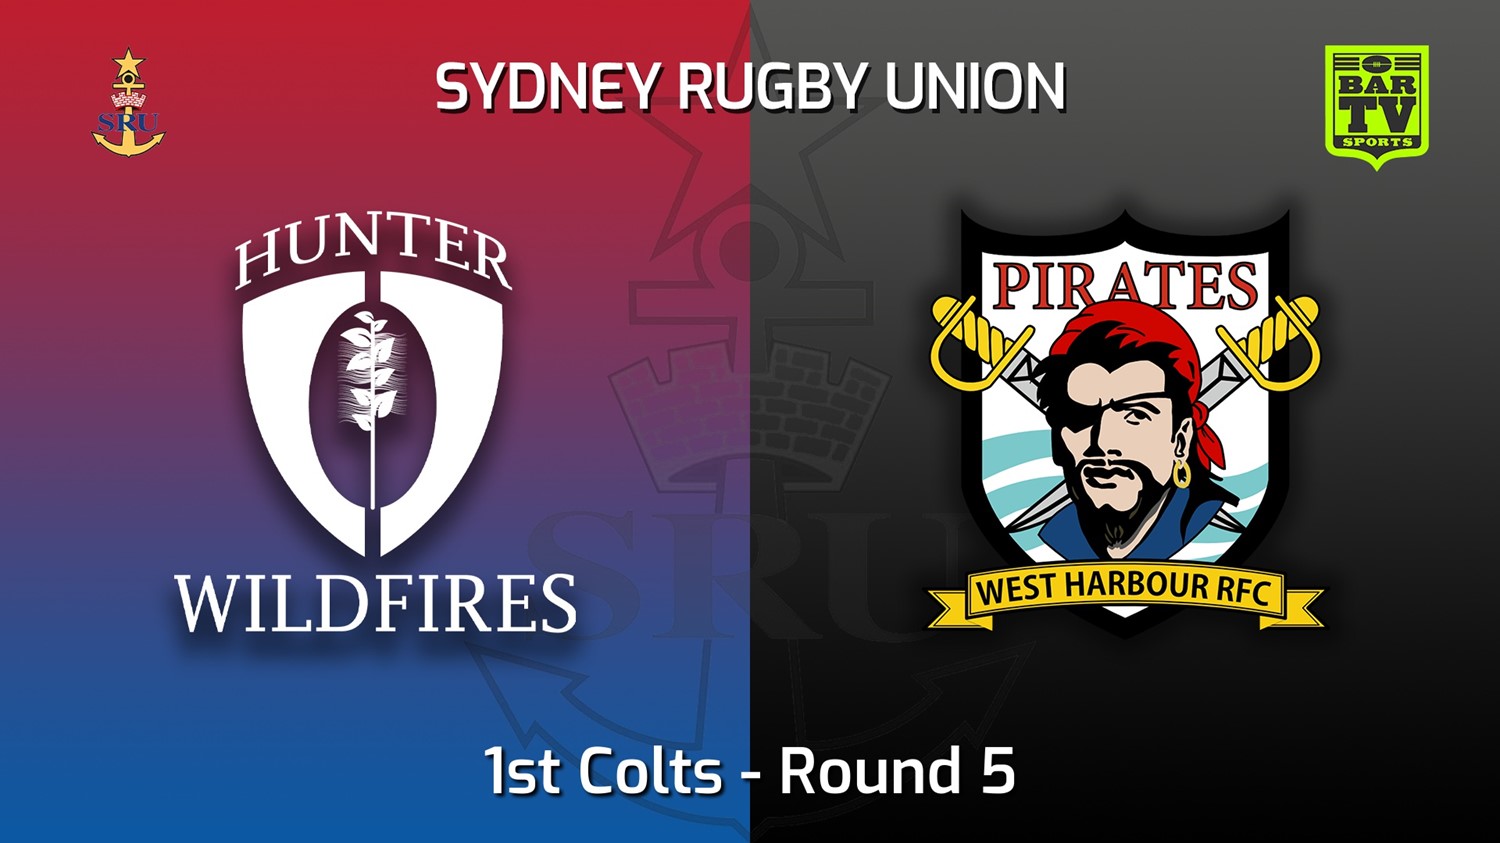 220430-Sydney Rugby Union Round 5 - 1st Colts - Hunter Wildfires v West Harbour Slate Image